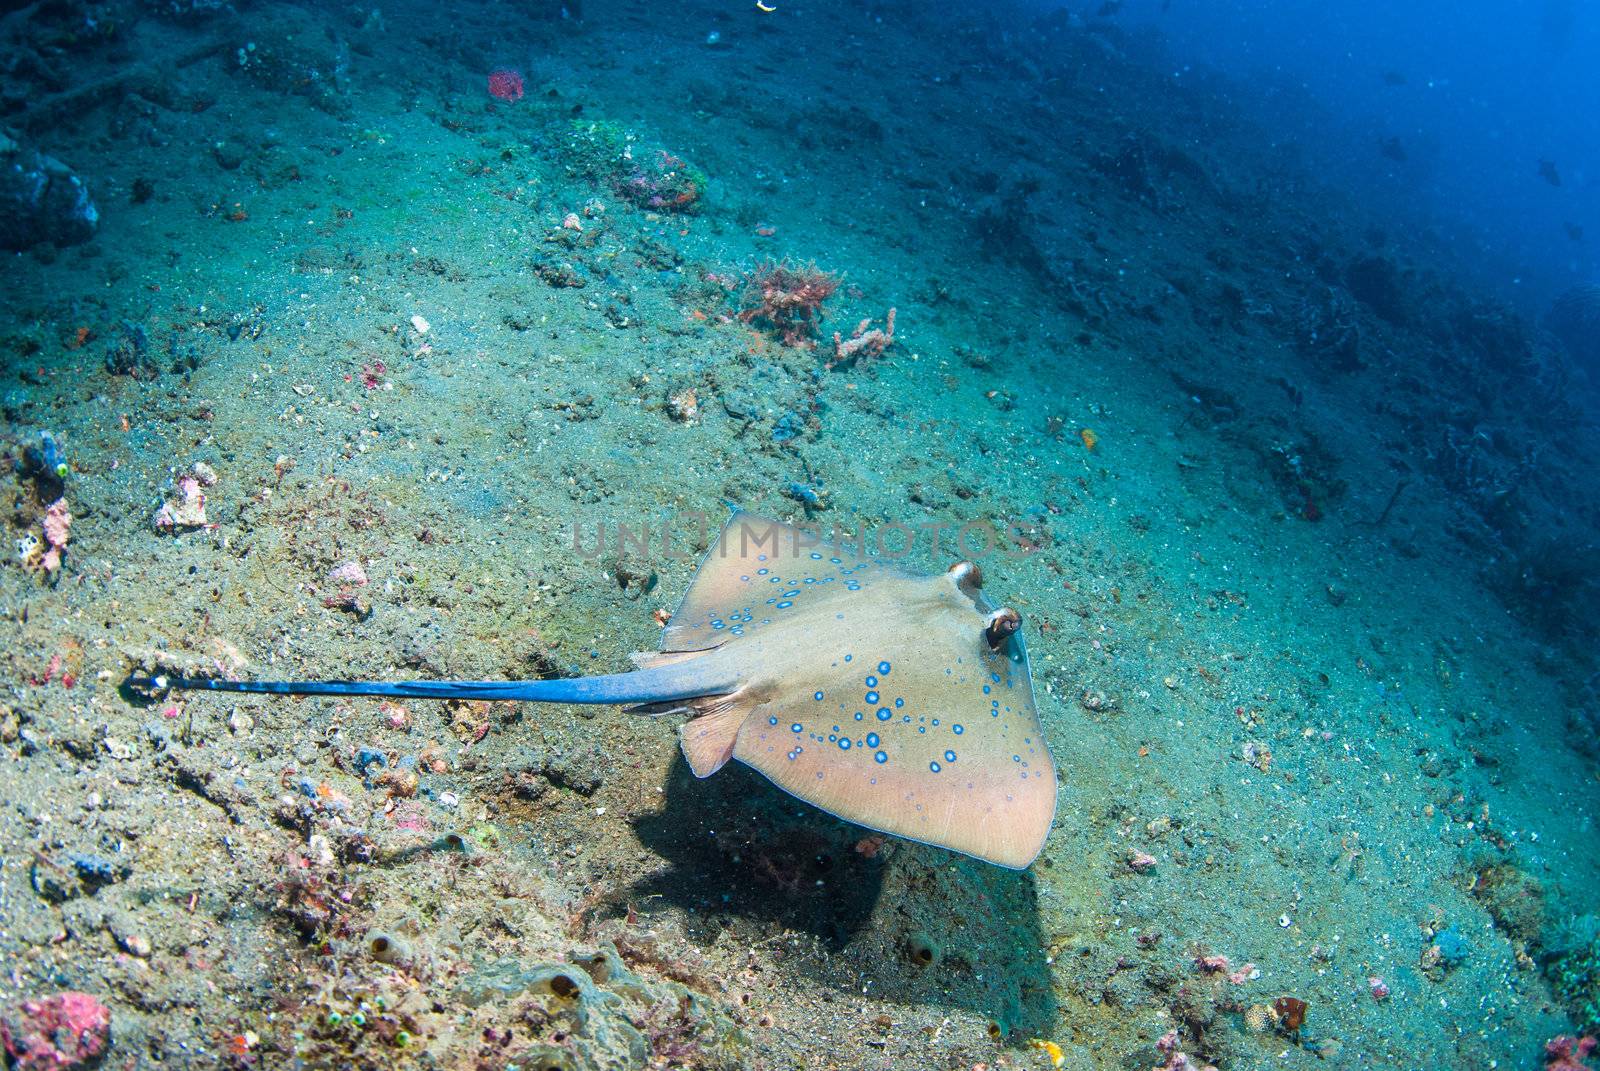 Blue spotted stingray by edan